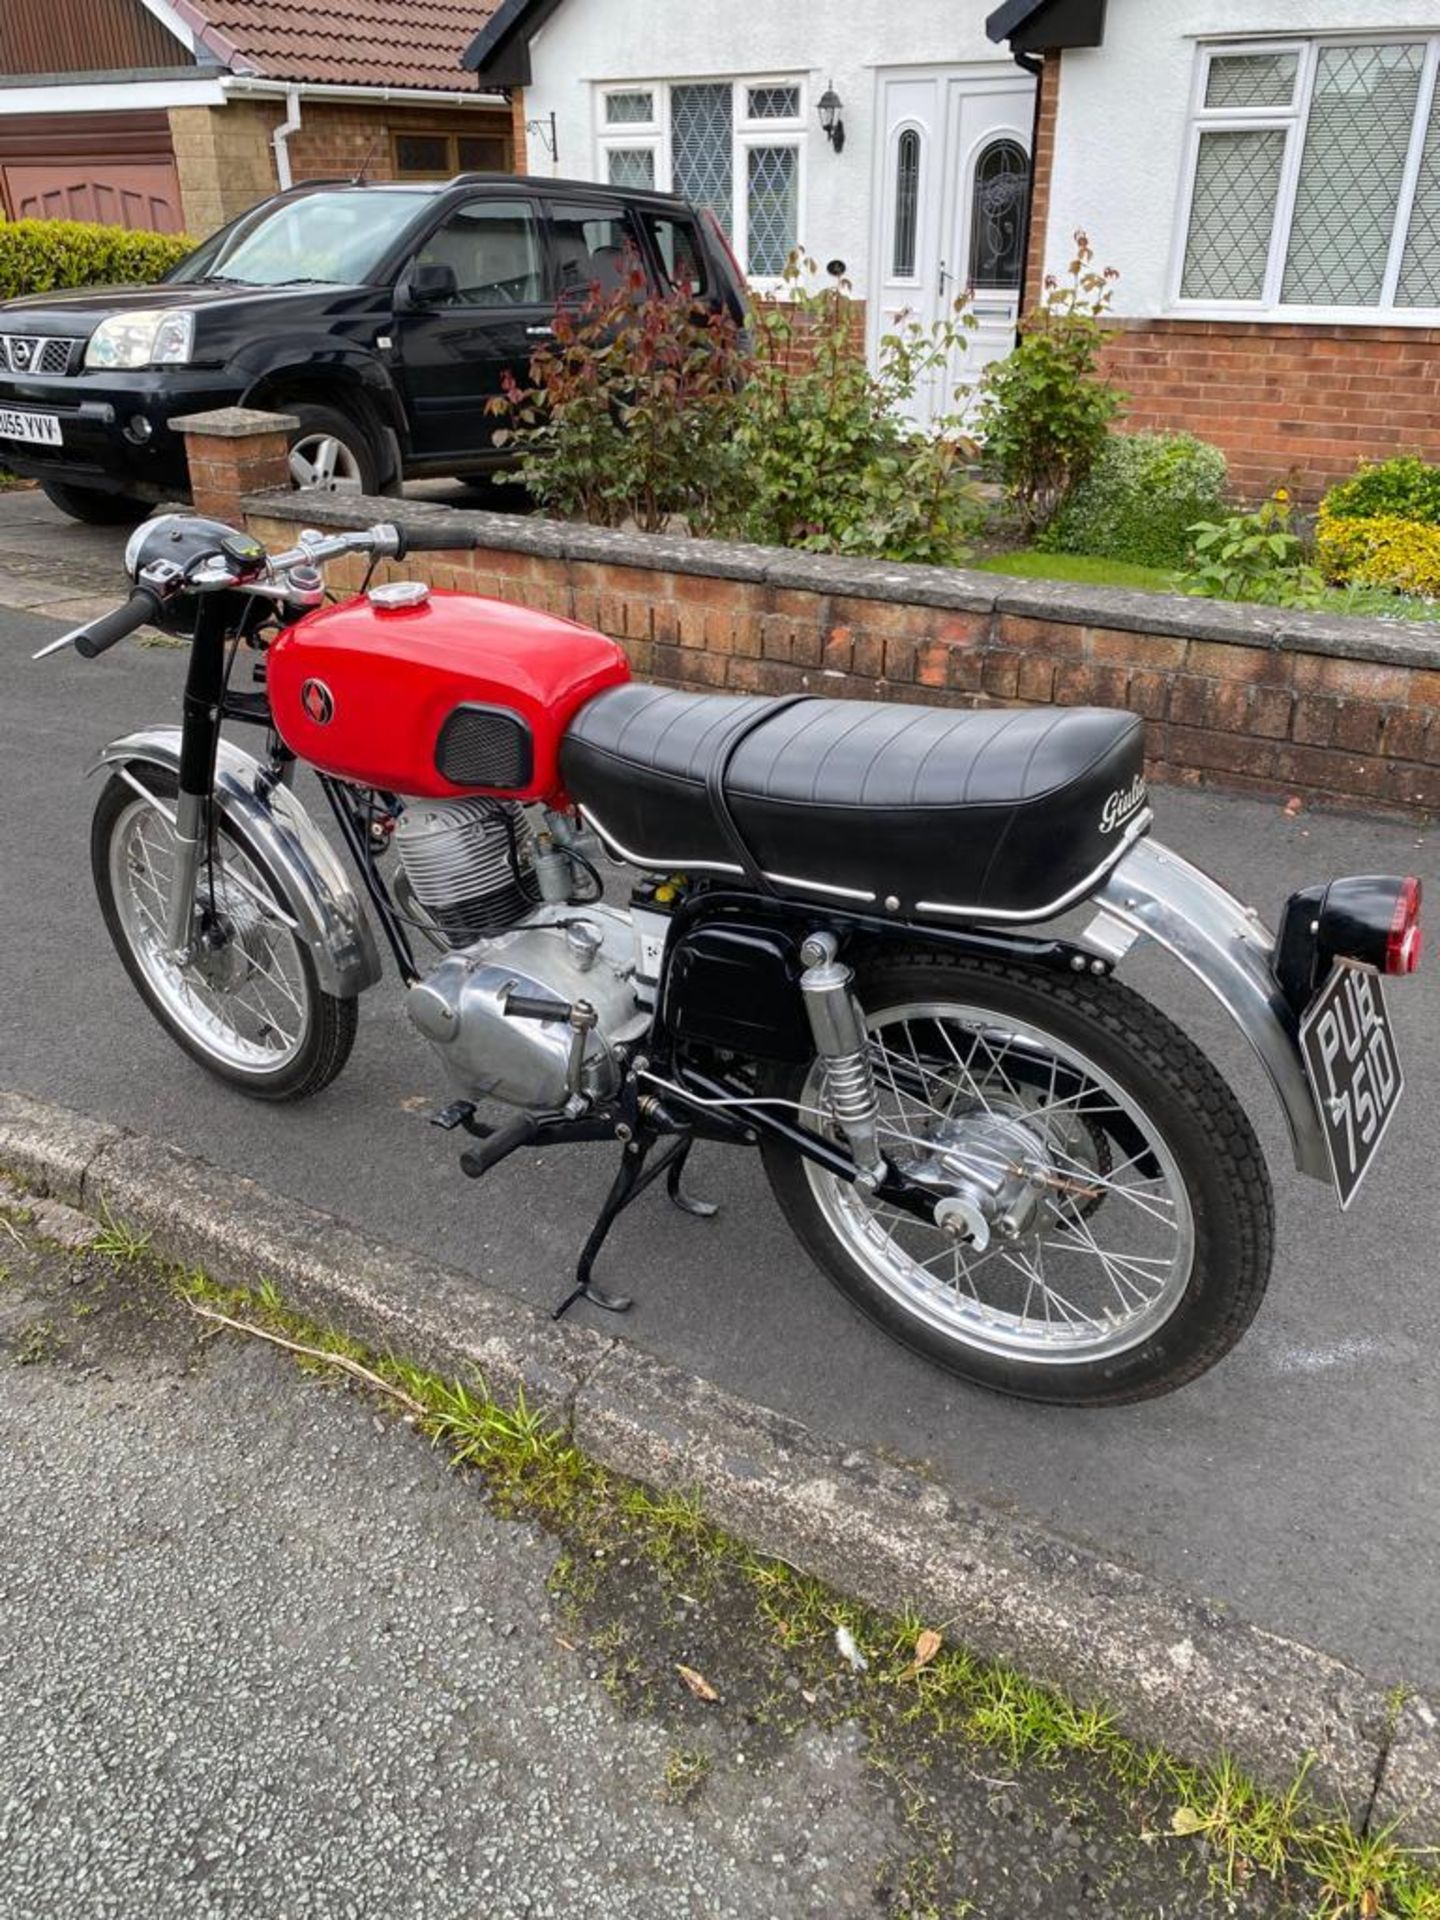 A 1966 GILERA 124 SPORT MOTORCYCLE, OHV, 5 SPEED, MATCHING FACTORY NUMBERS, IMPORTED IN APPROX - Image 2 of 5